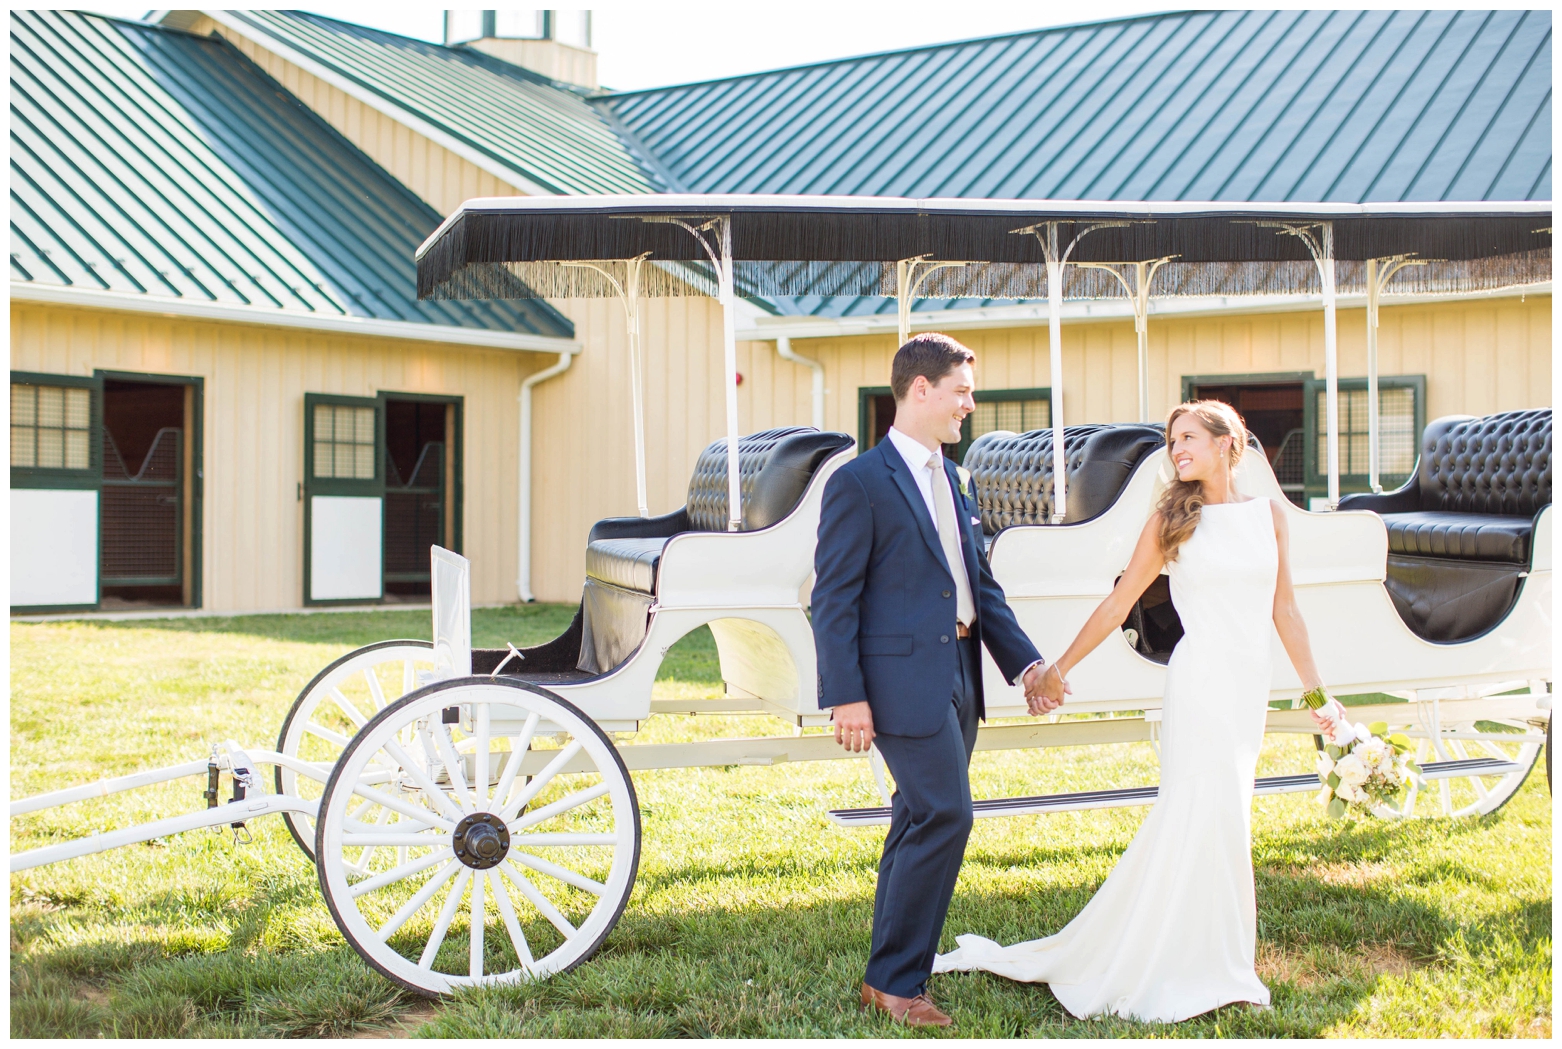 View More: http://hopetaylorphotographyphotos.pass.us/emily-and-kyle